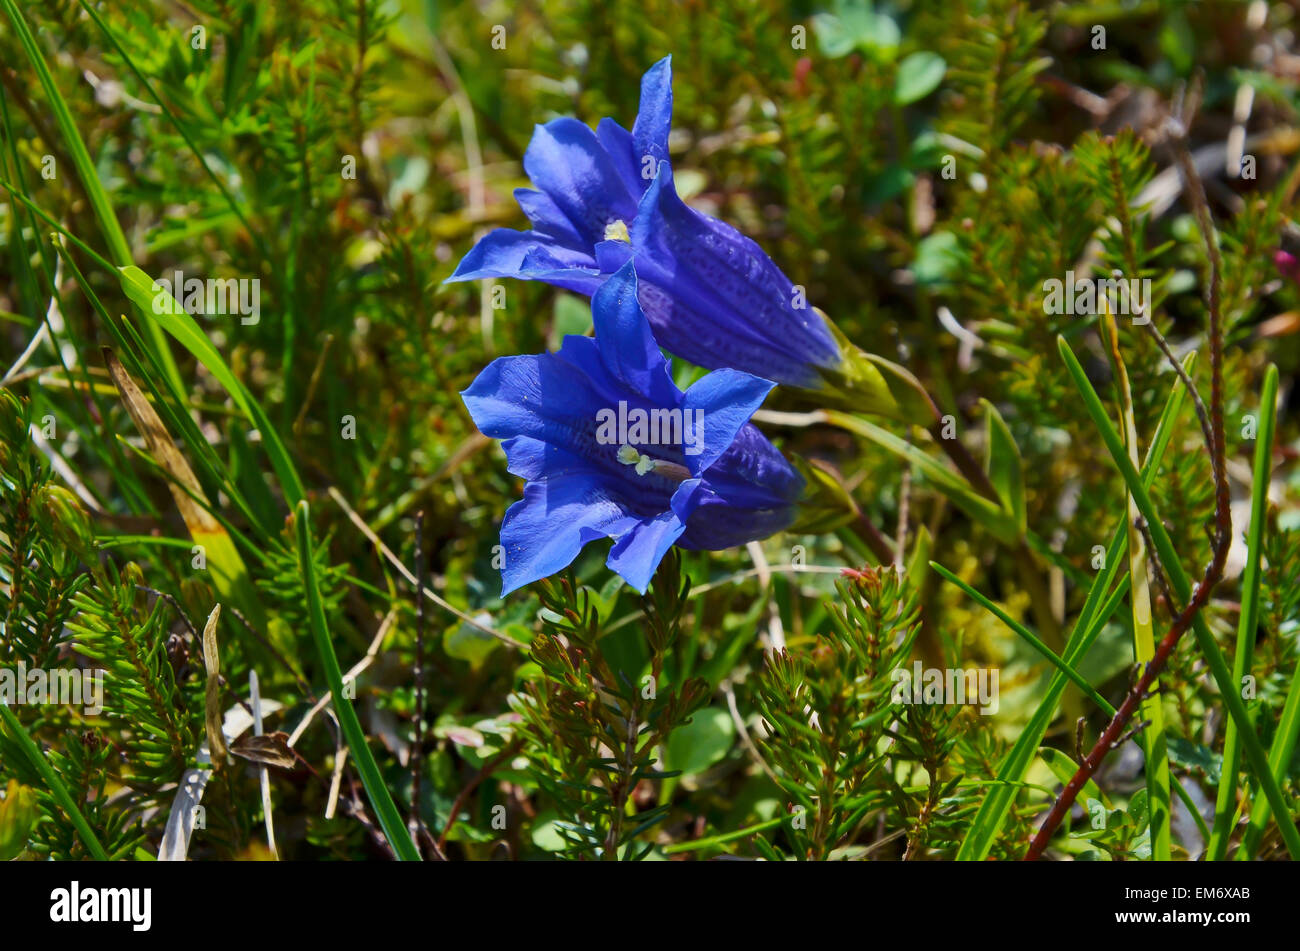 One of the most characteristic flowers in the Alps - the stemless, blue gentian! Stock Photo